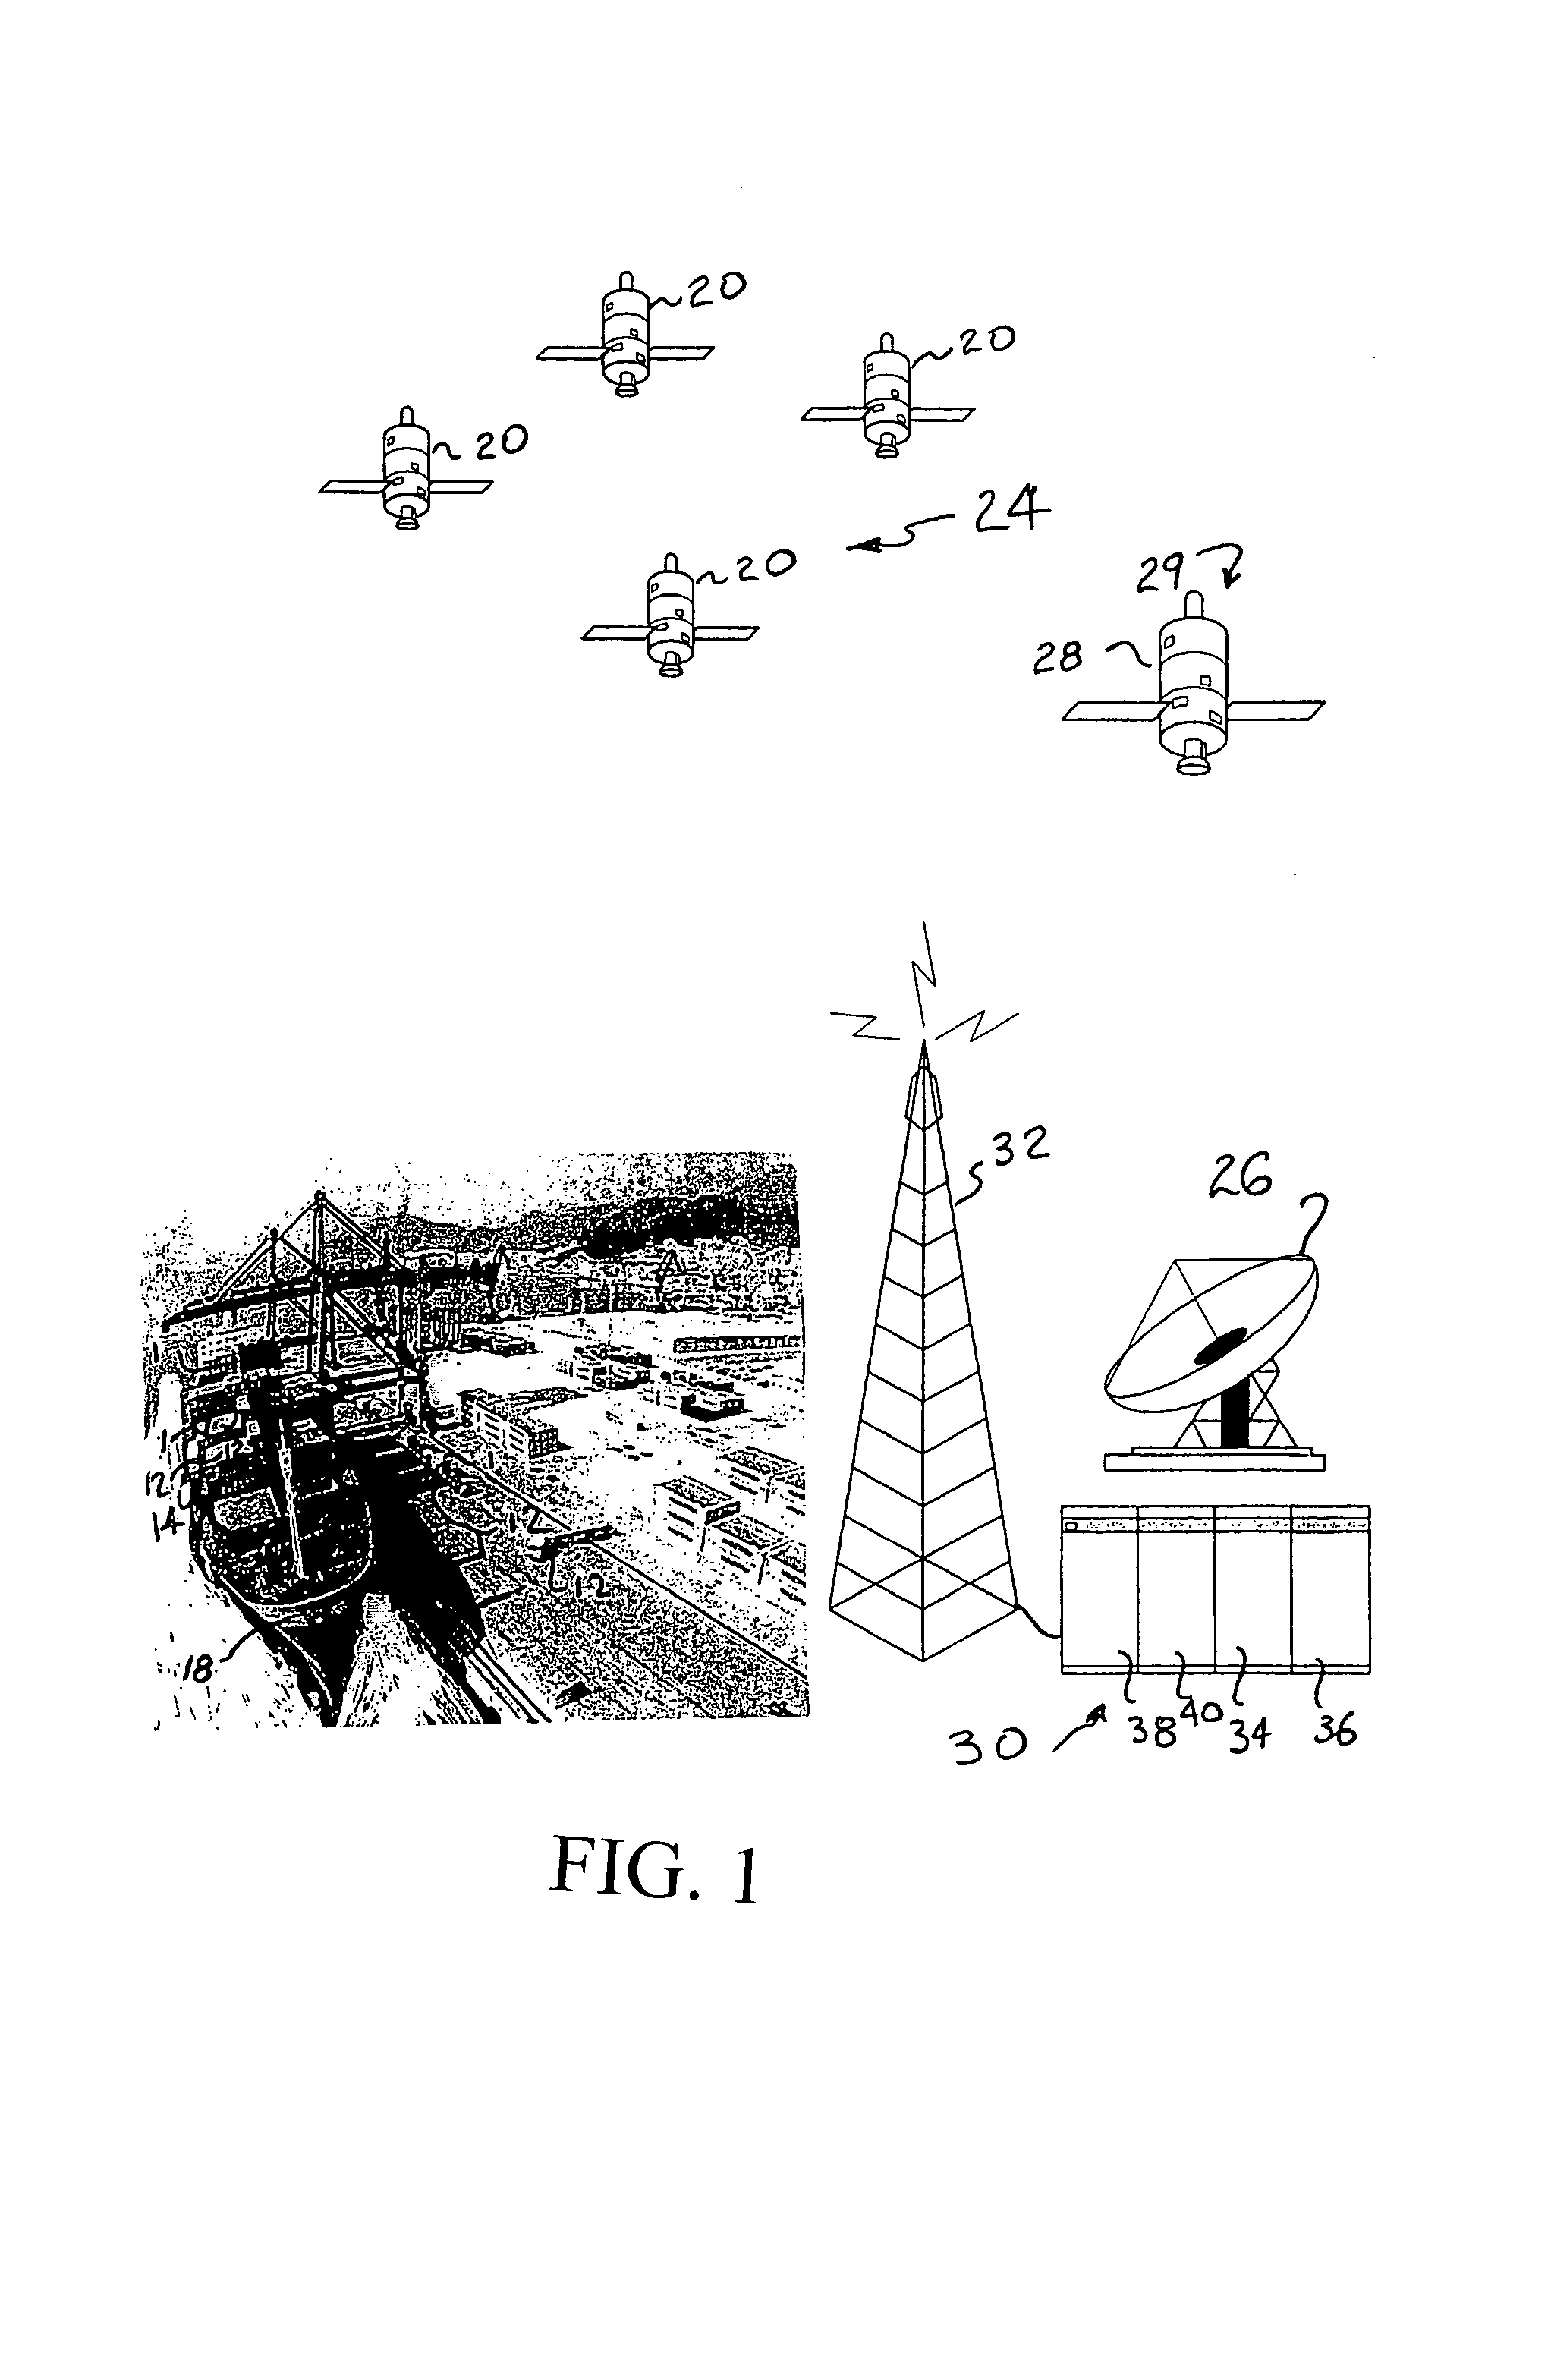 Security system including a method and system for acquiring GPS satellite position